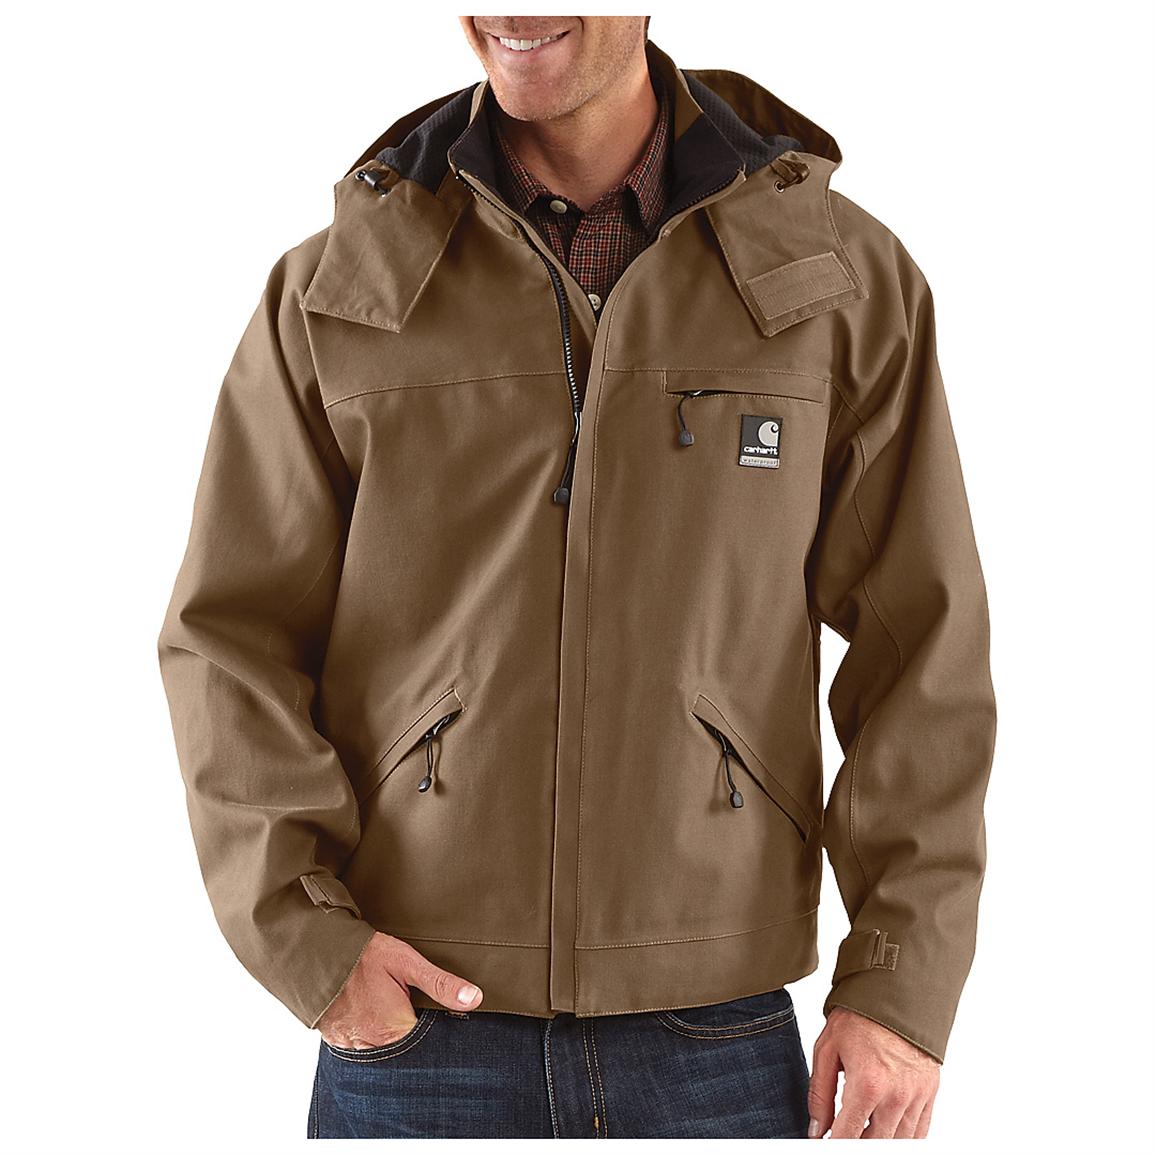  Carhartt   Dura Dry  Hooded  Detroit Jacket  Canyon Brown 